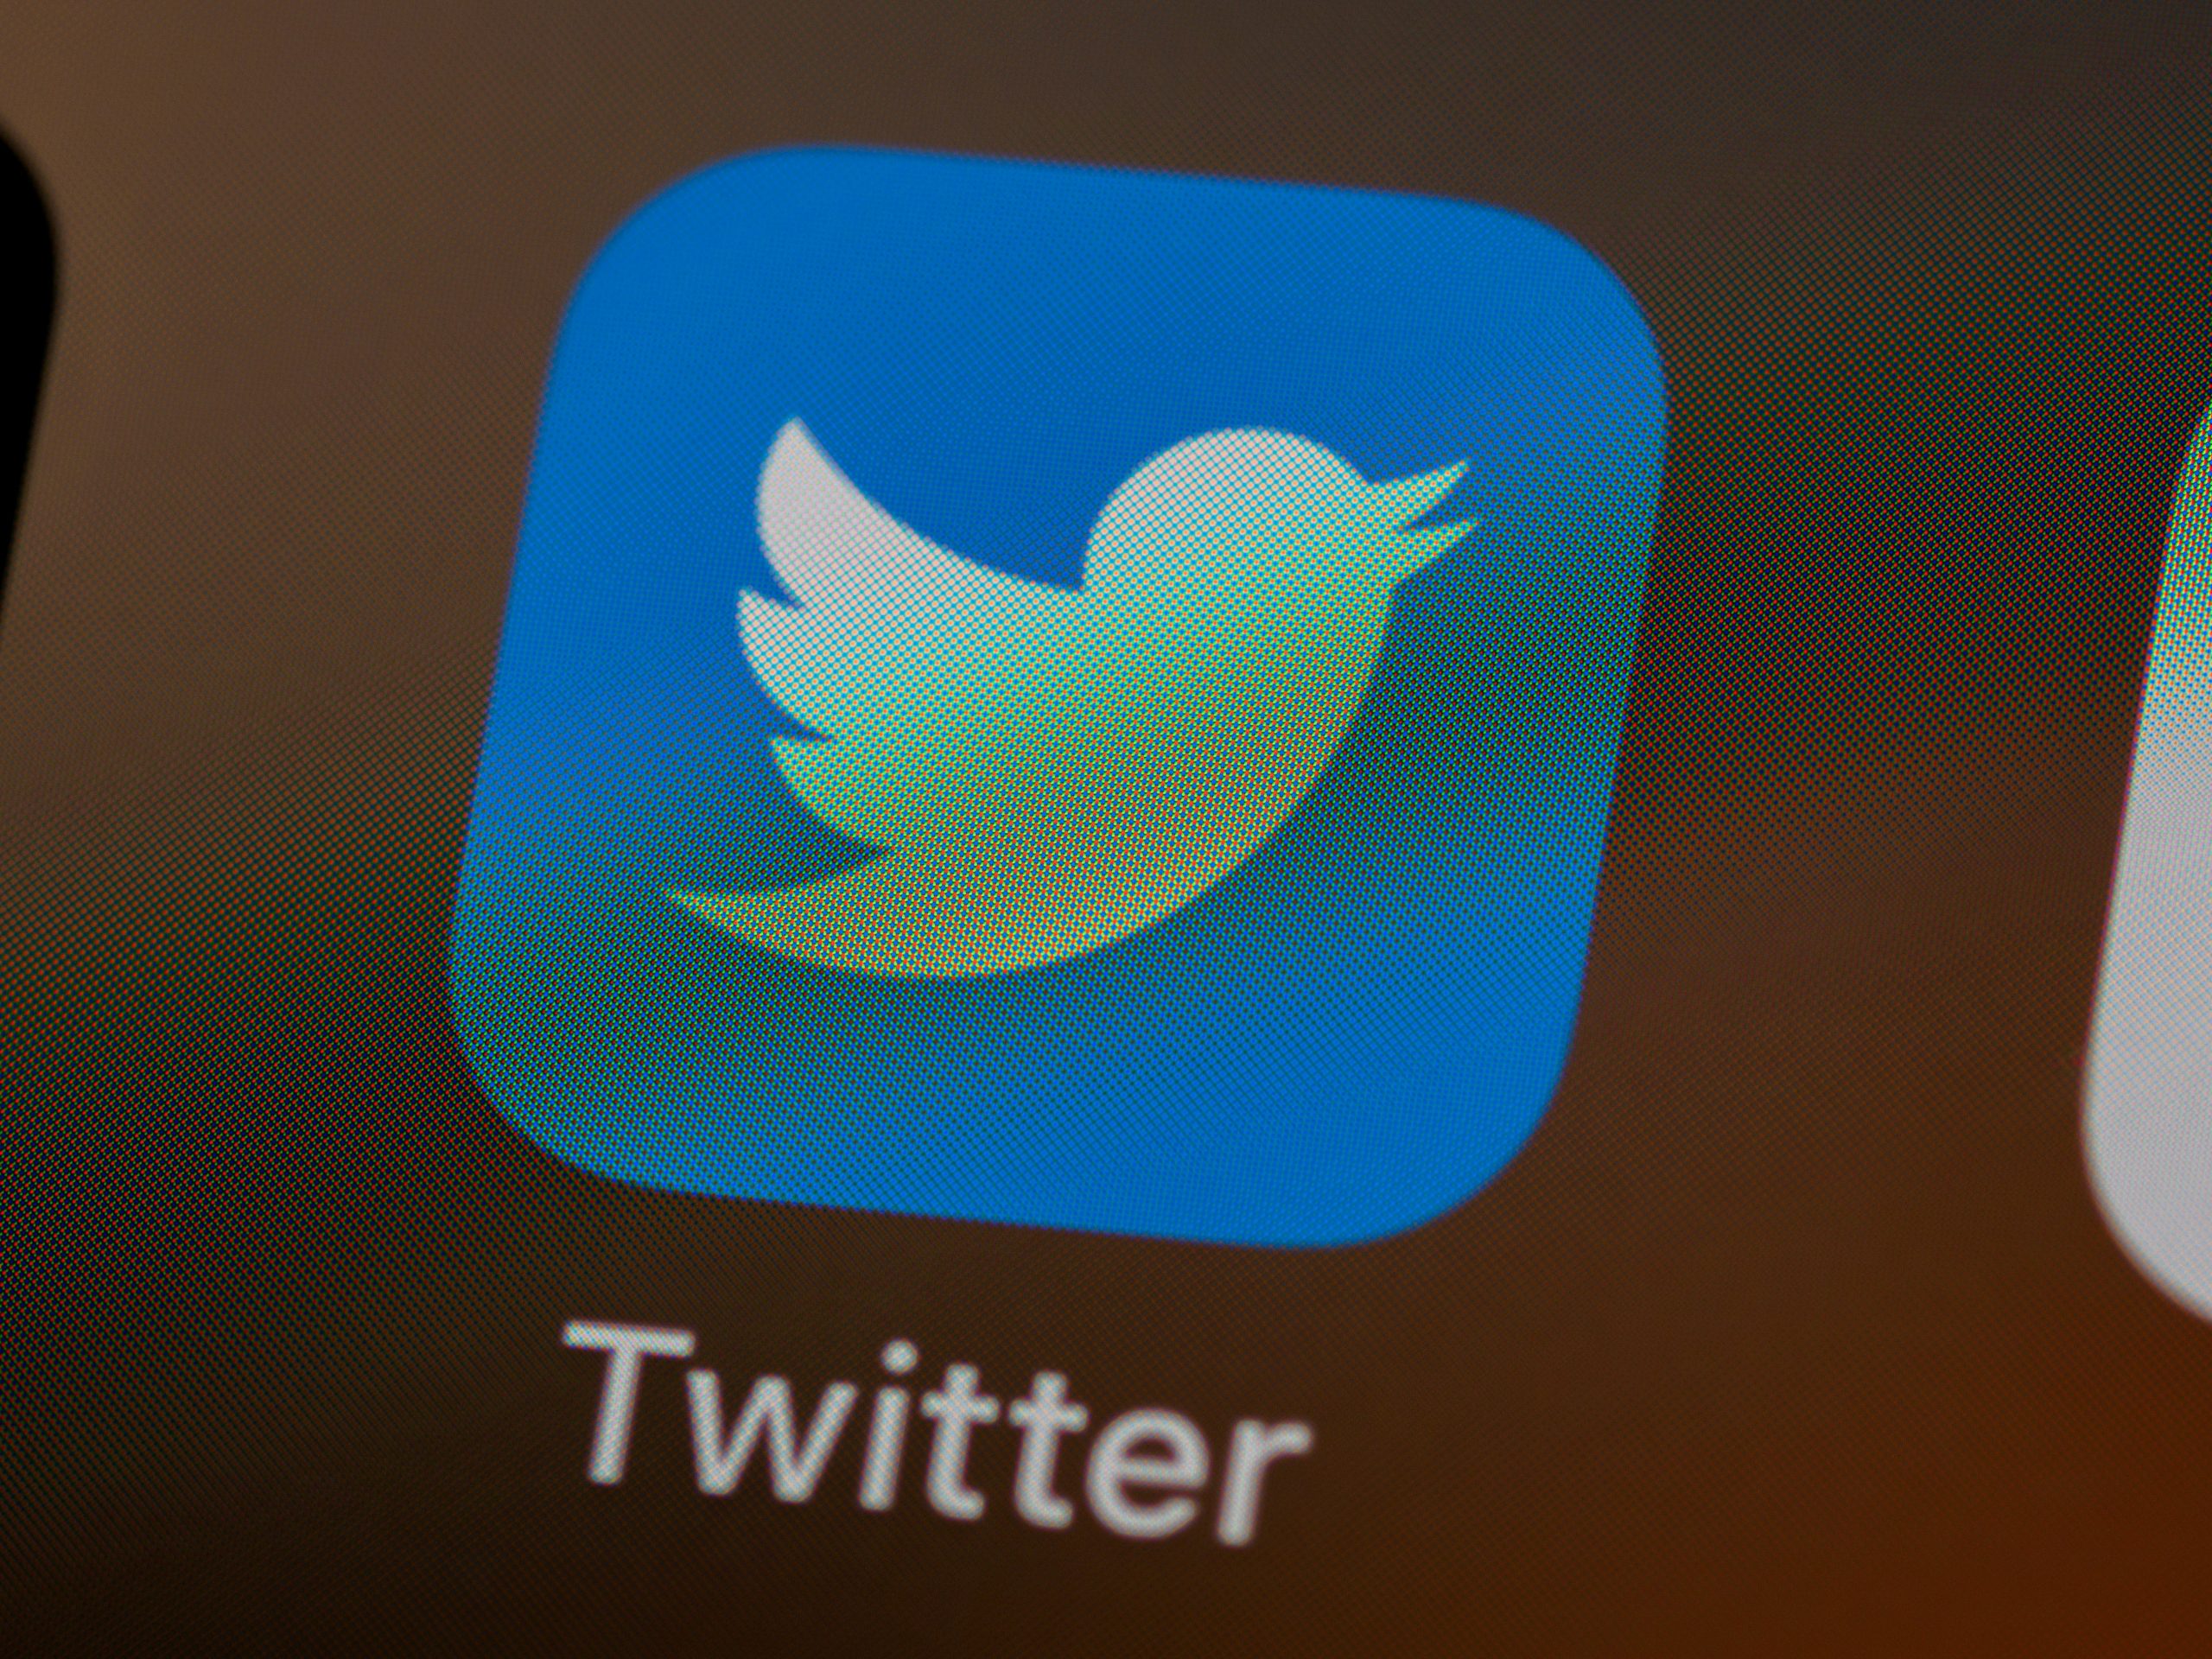 Periscope, Twitter’s live streaming app, might shutdown: Reports